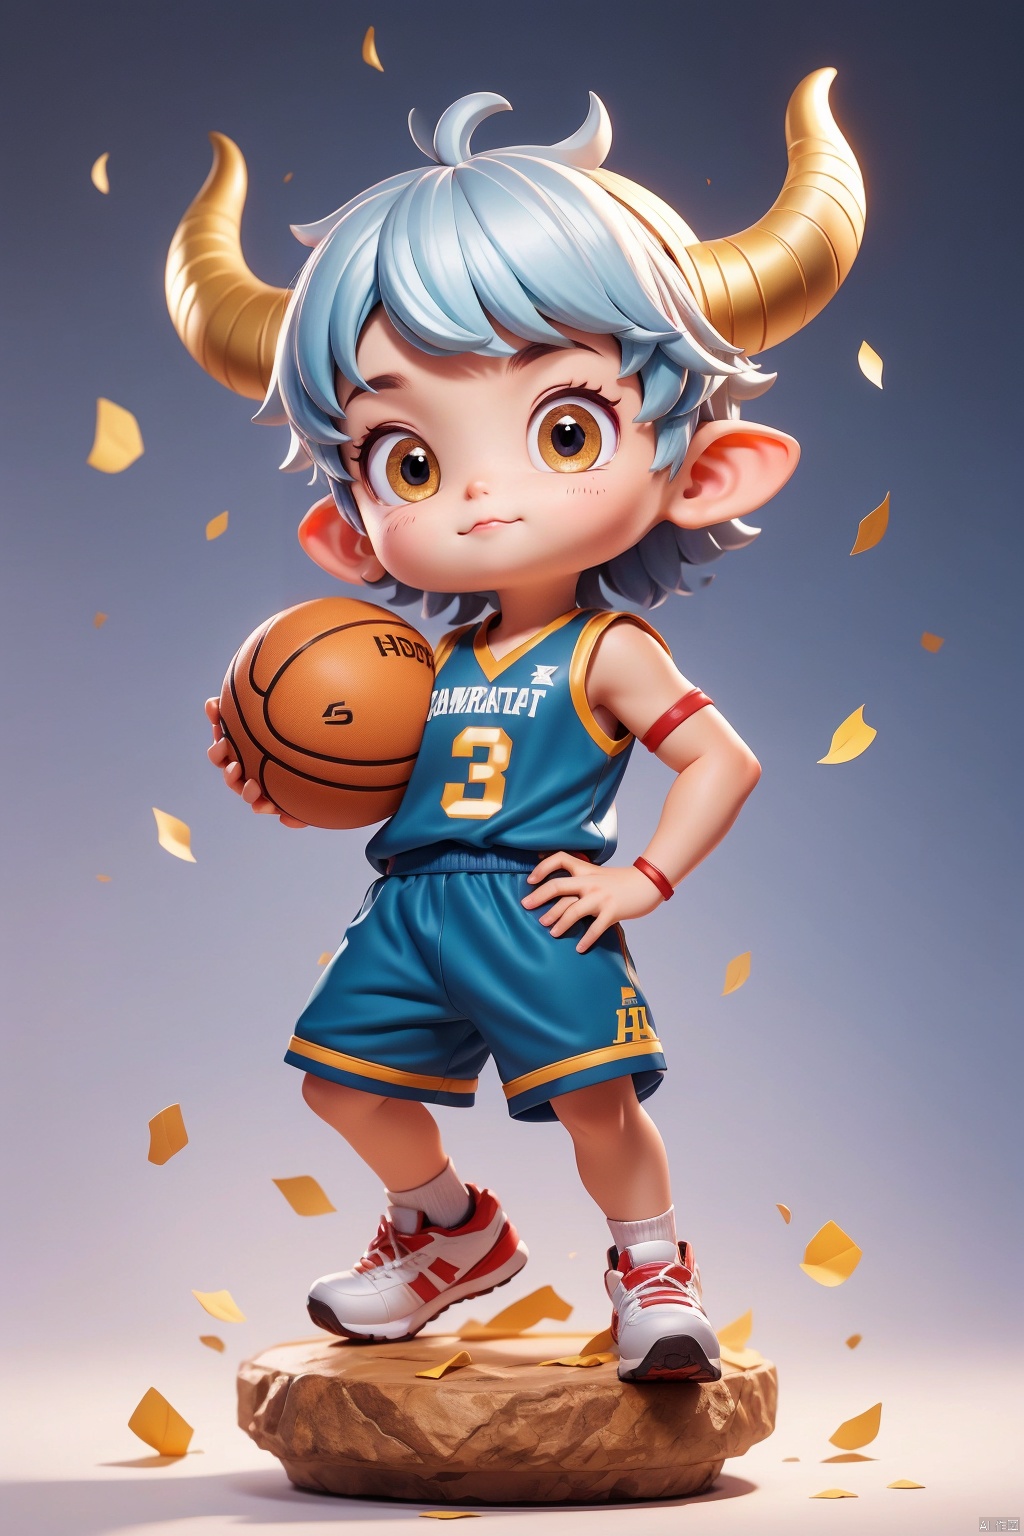 1 Little boy, 3 years old, Animal IP, solo, (Q version :0.9), determined expression, horns, blush, basketball uniform, athlete figure, simple background, silver hair, American buzz cut, one hand akimbo